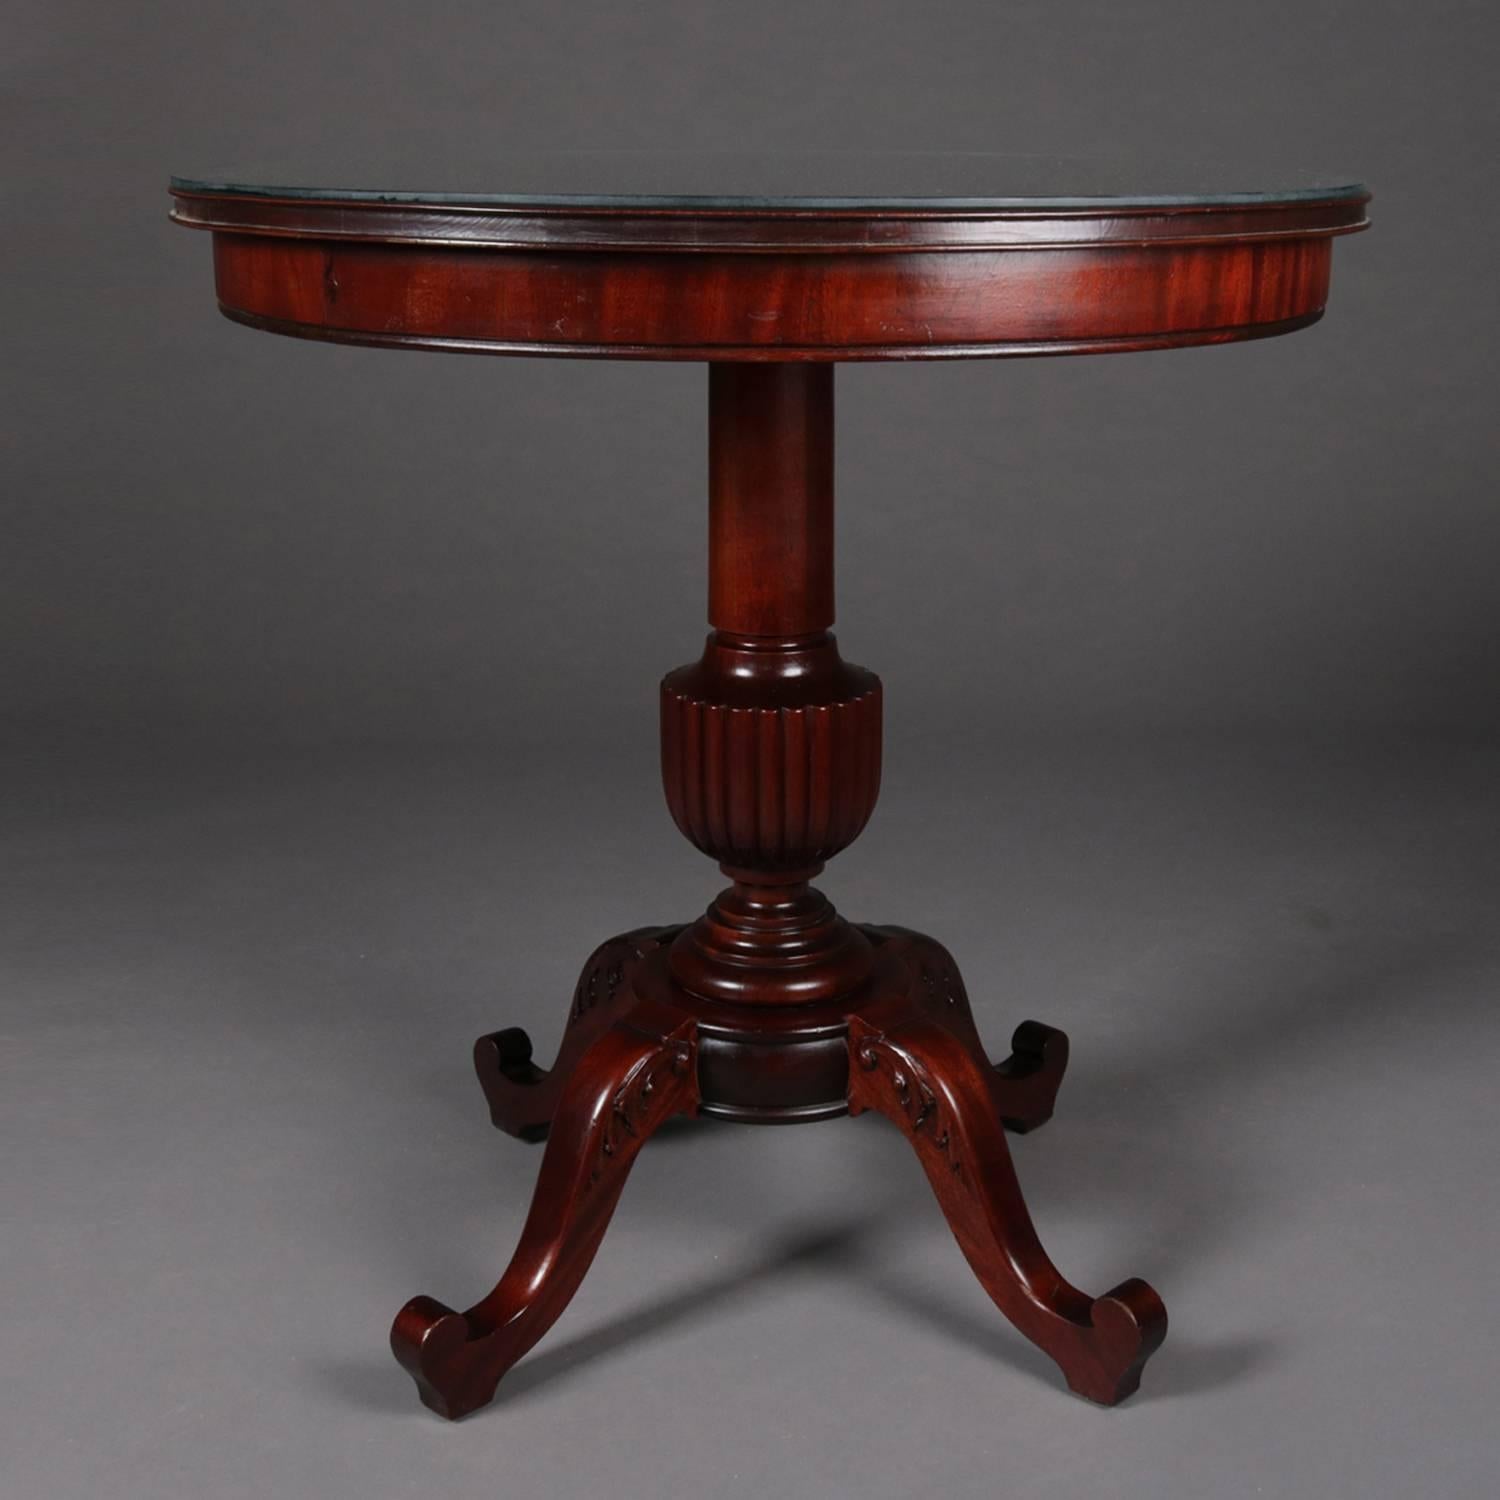 Antique French style Horner Bros. round center table features flame mahogany construction with urn form pedestal raised on three foliate carved scroll form legs, protective glass top, circa 1900


Measures: 31